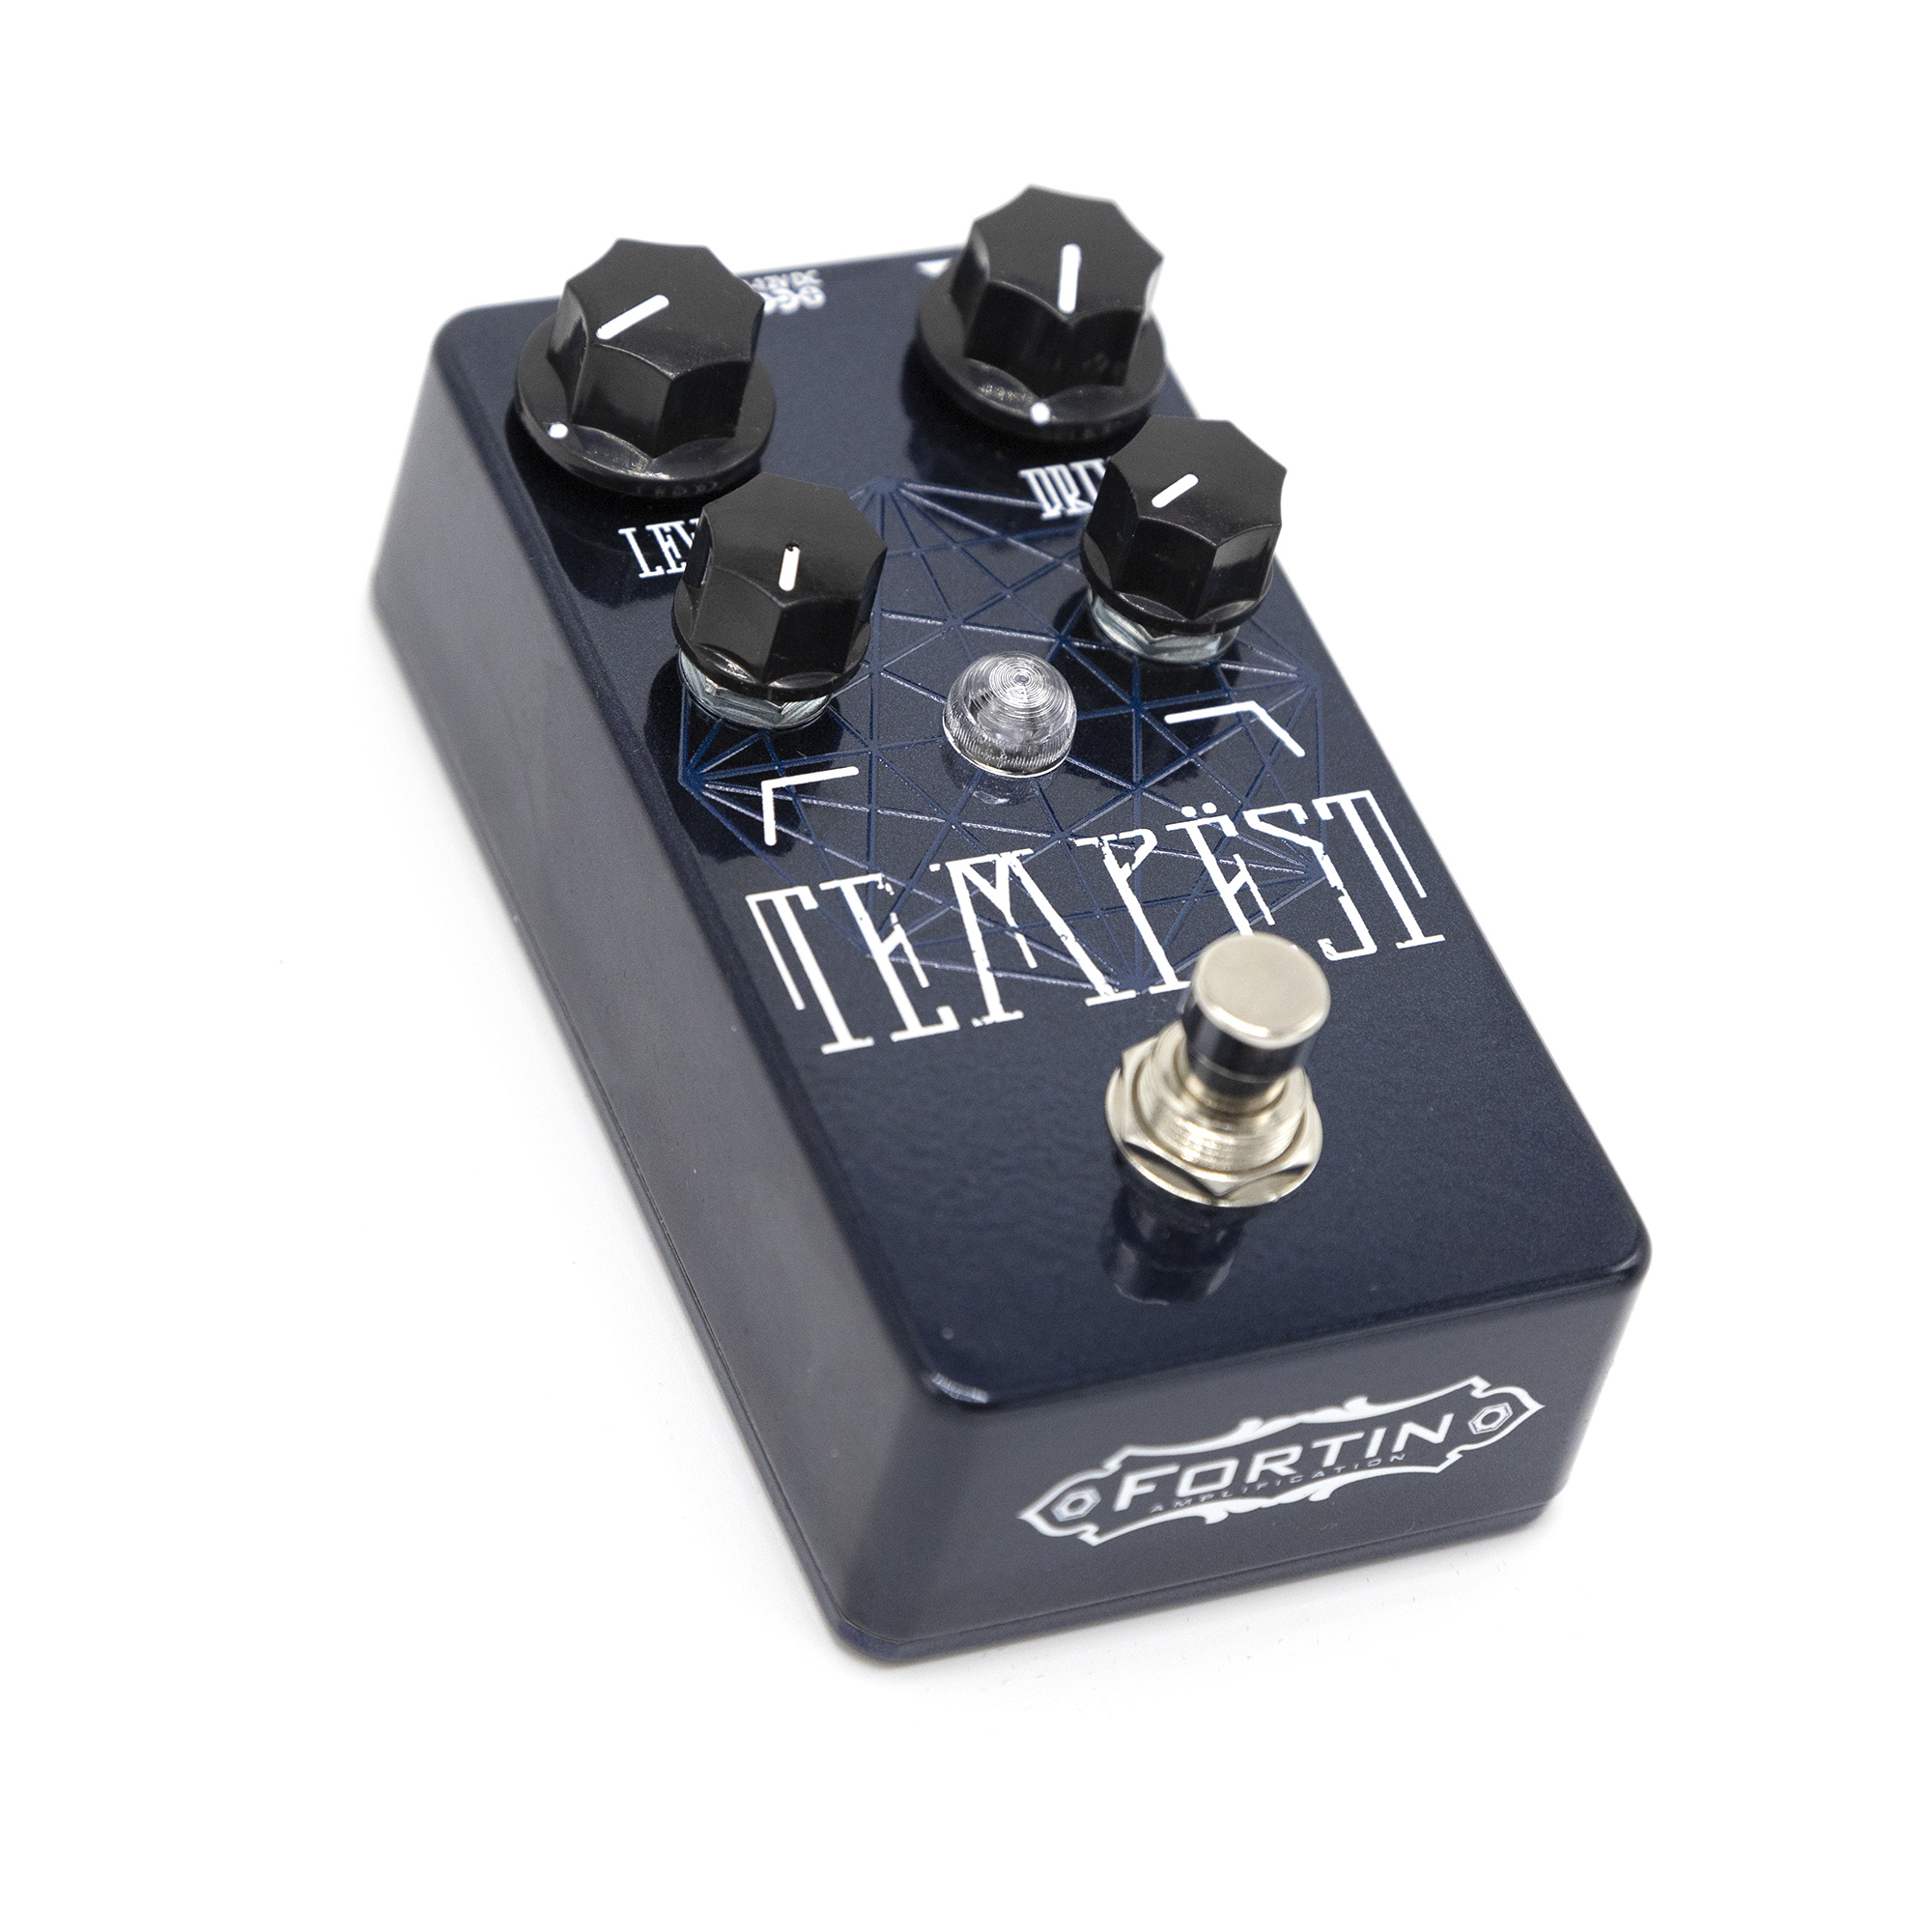 Fortin Amps Tempest Architects Signature Pedal - Overdrive, distortion & fuzz effect pedal - Variation 1